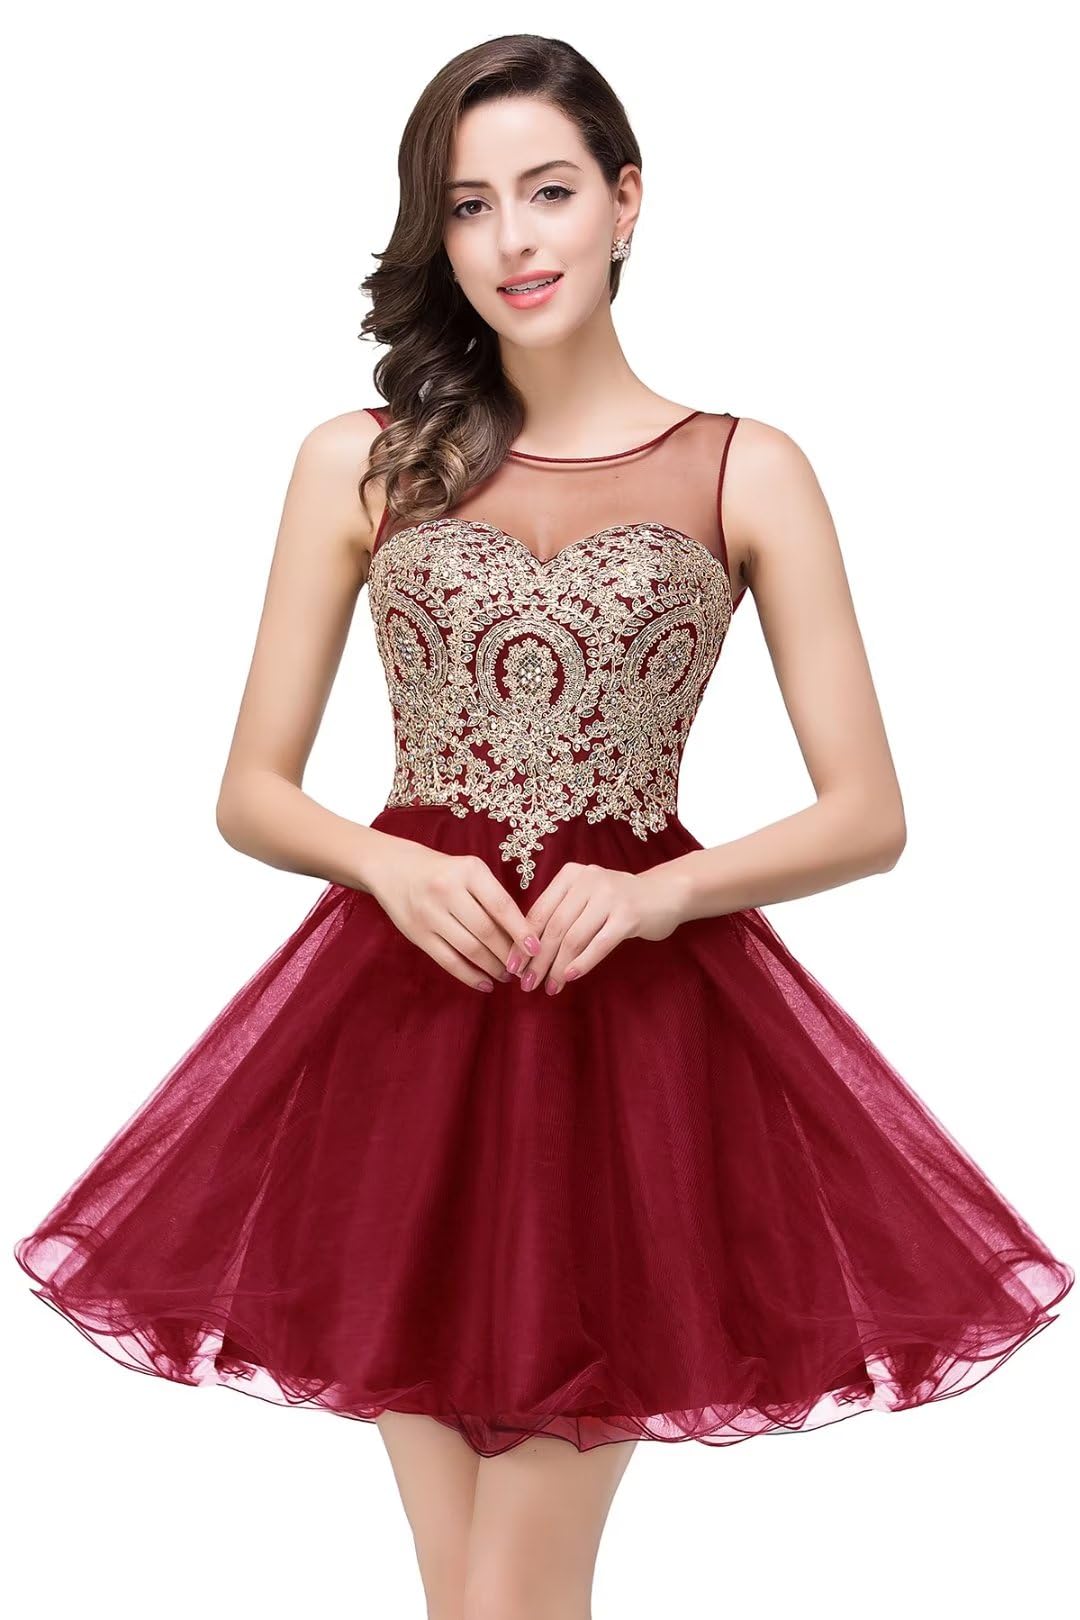 MisShow Womens Short Tulle Crystals Applique Homecoming Dress Short Formal Prom Gown Burgundy XL